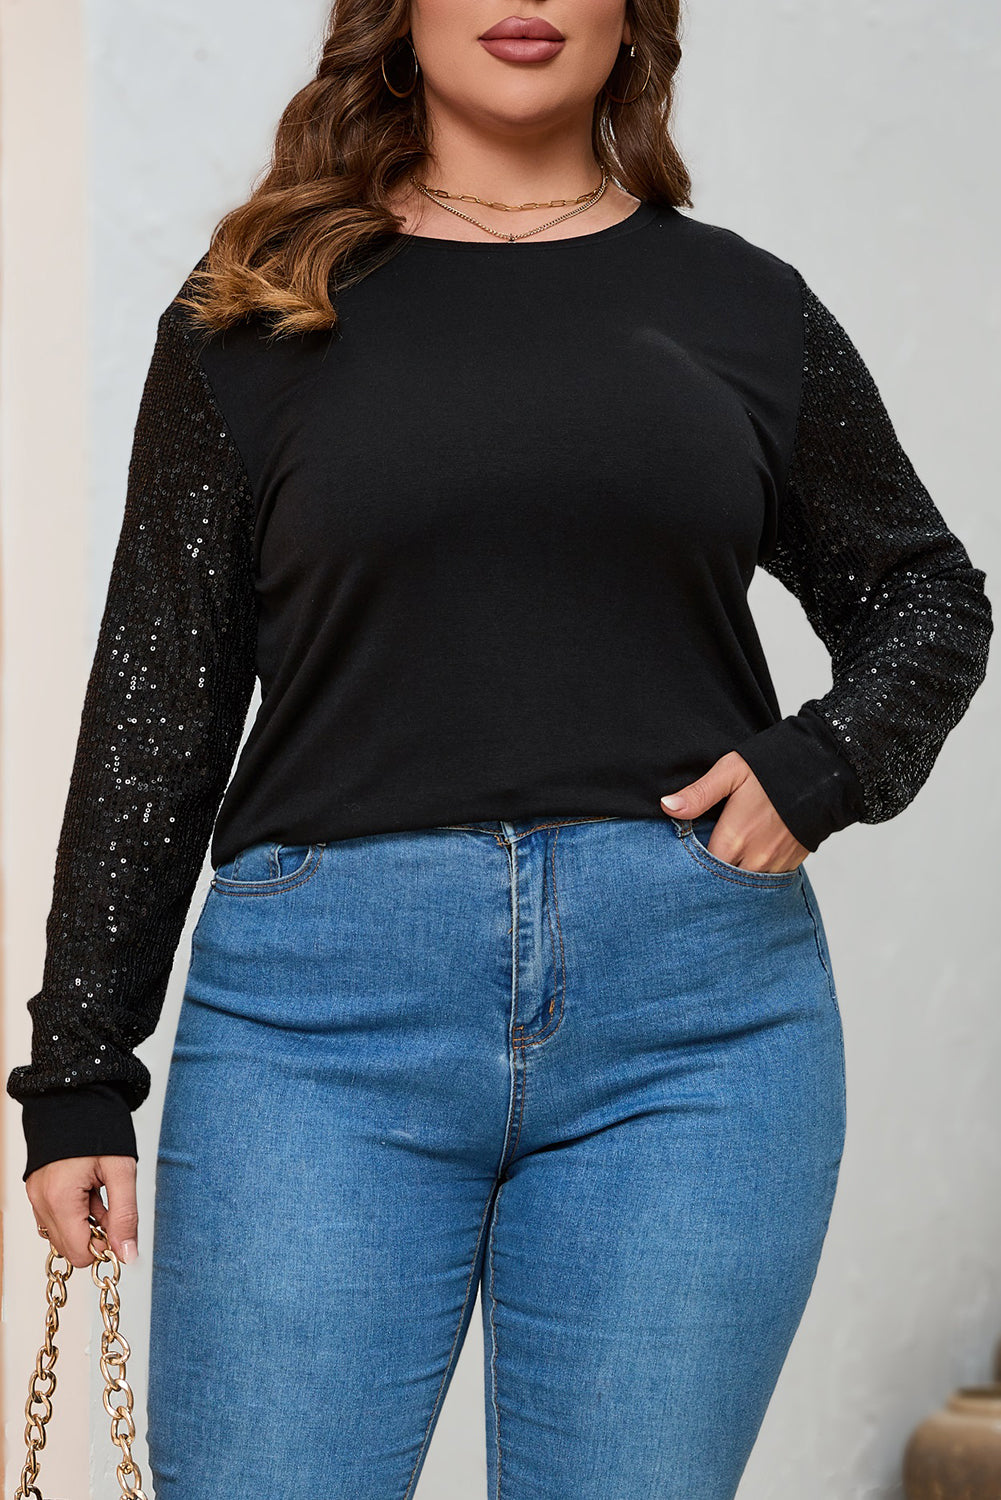 Black Sequin Contrast Long Sleeve Plus Size Top - SELFTRITSS